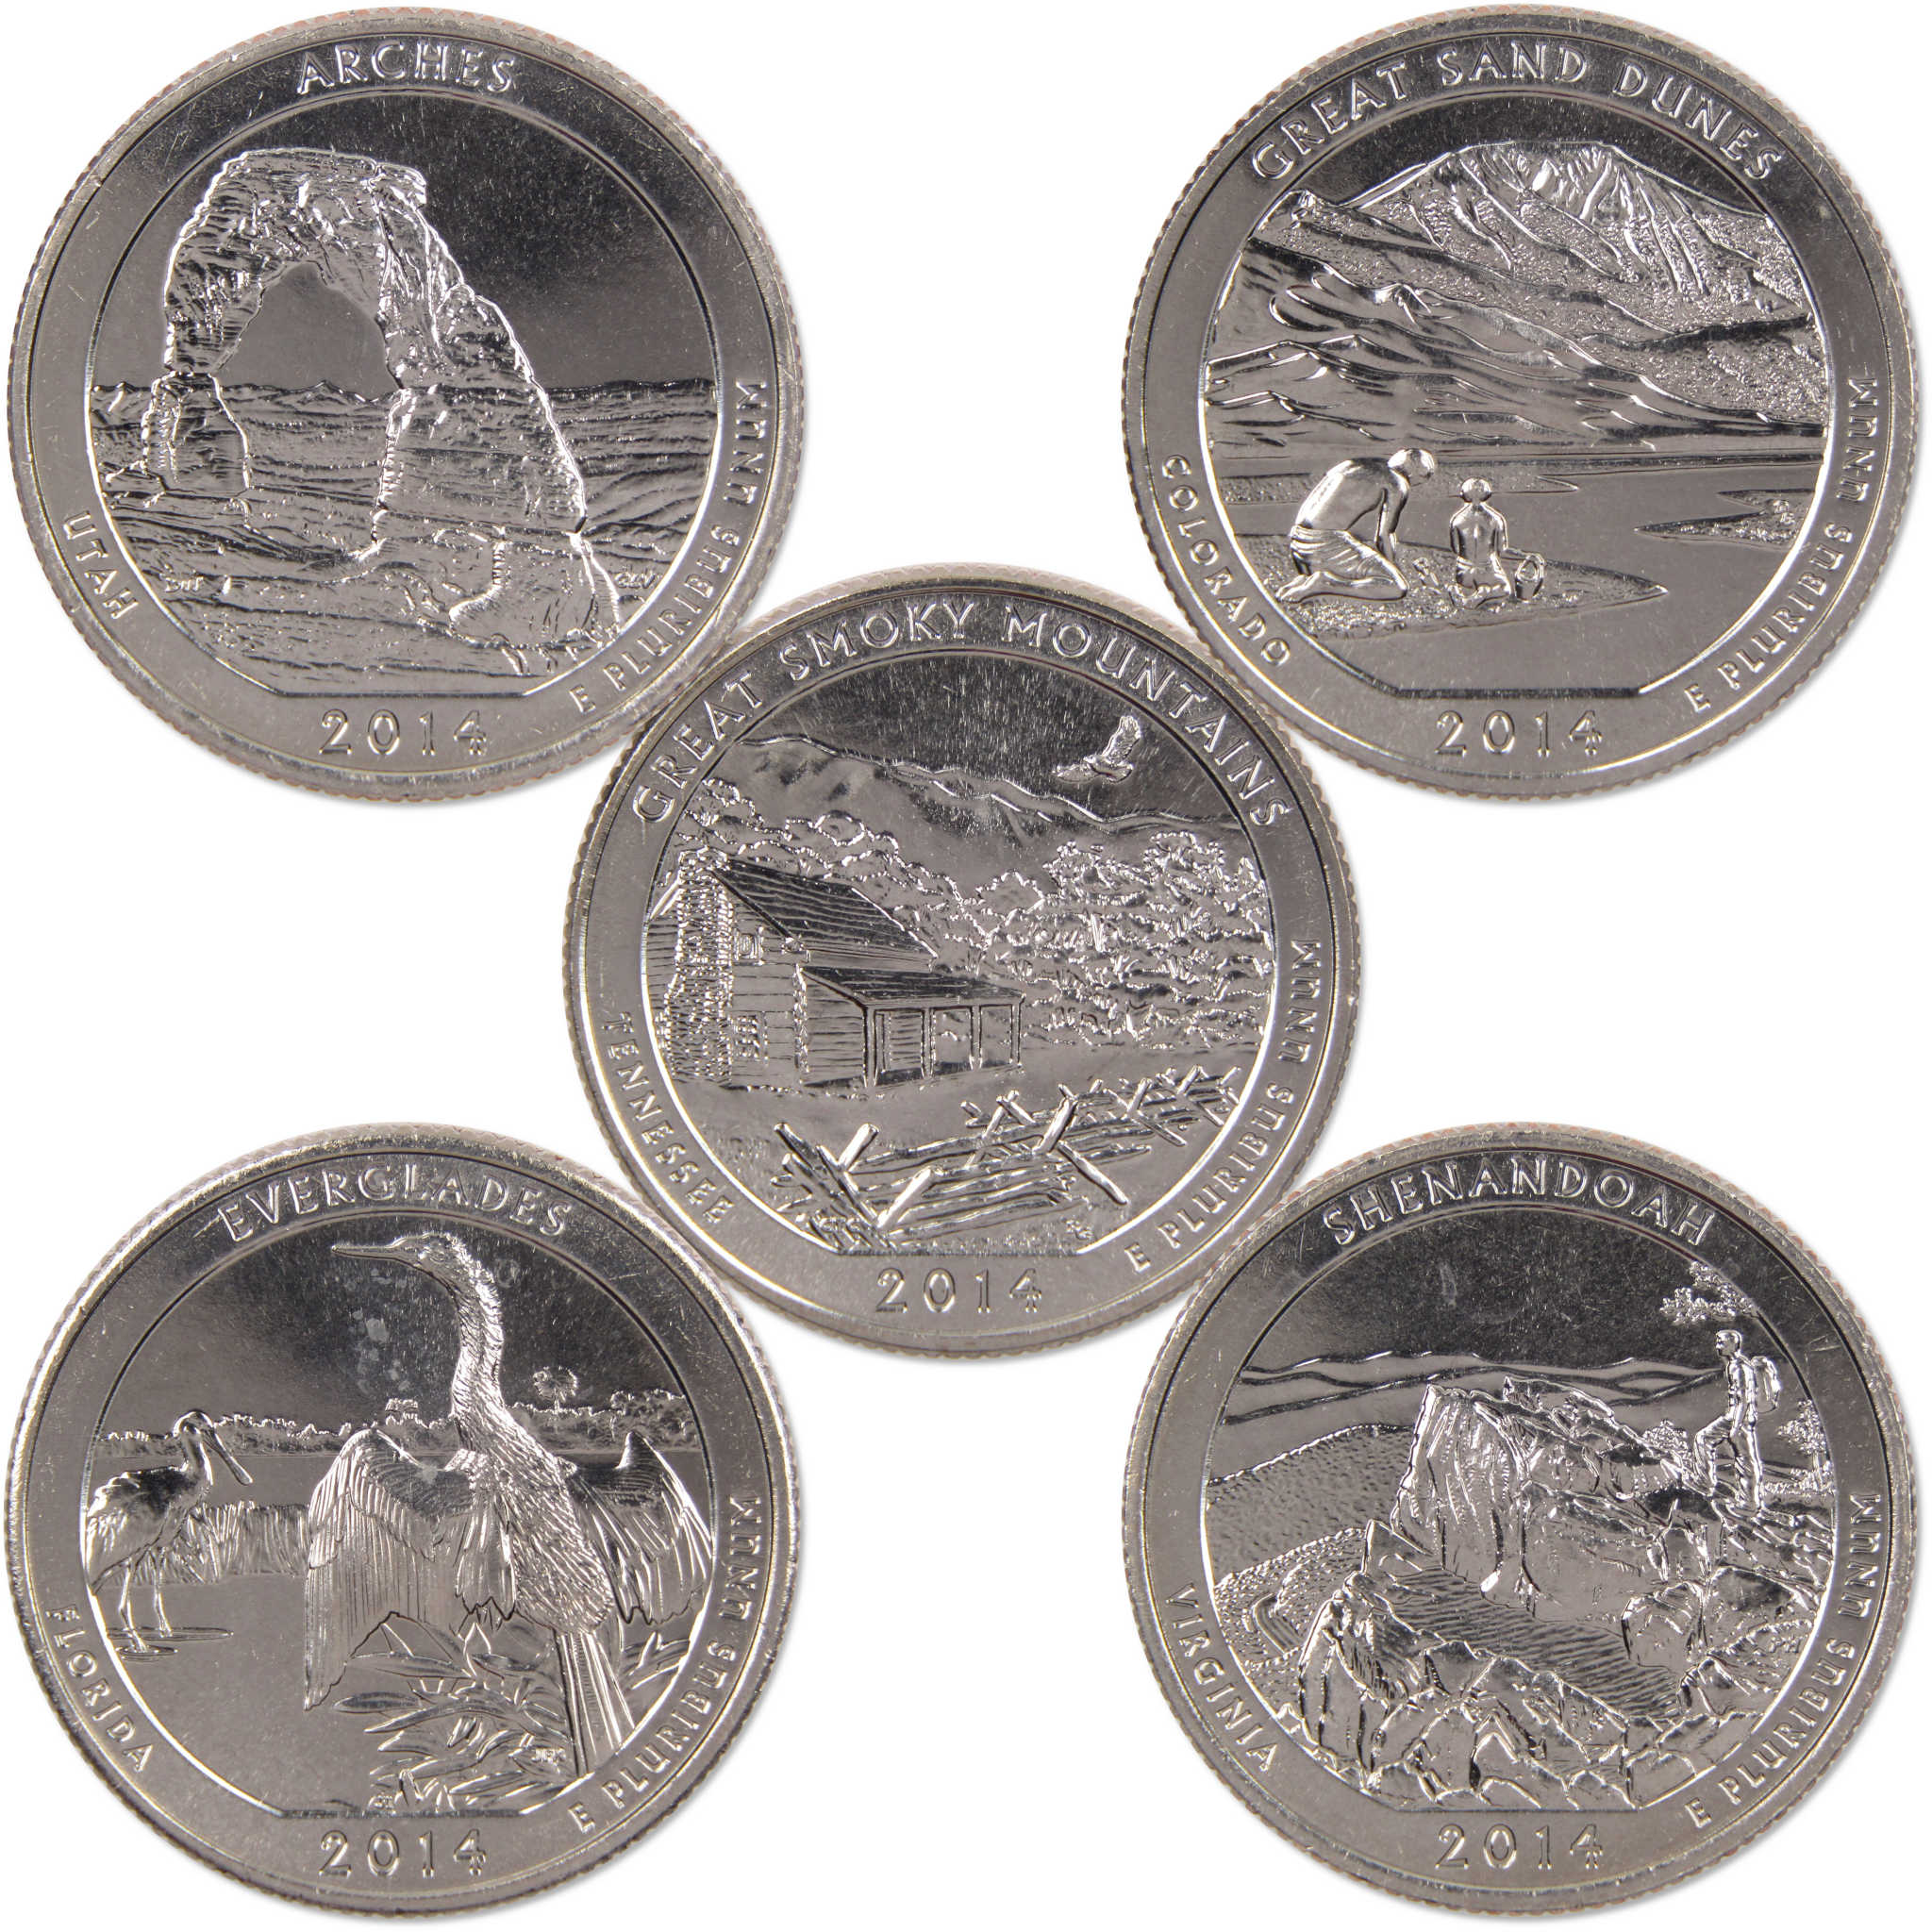 2014 S National Park Quarter 5 Coin Set Uncirculated Mint State Clad 25c